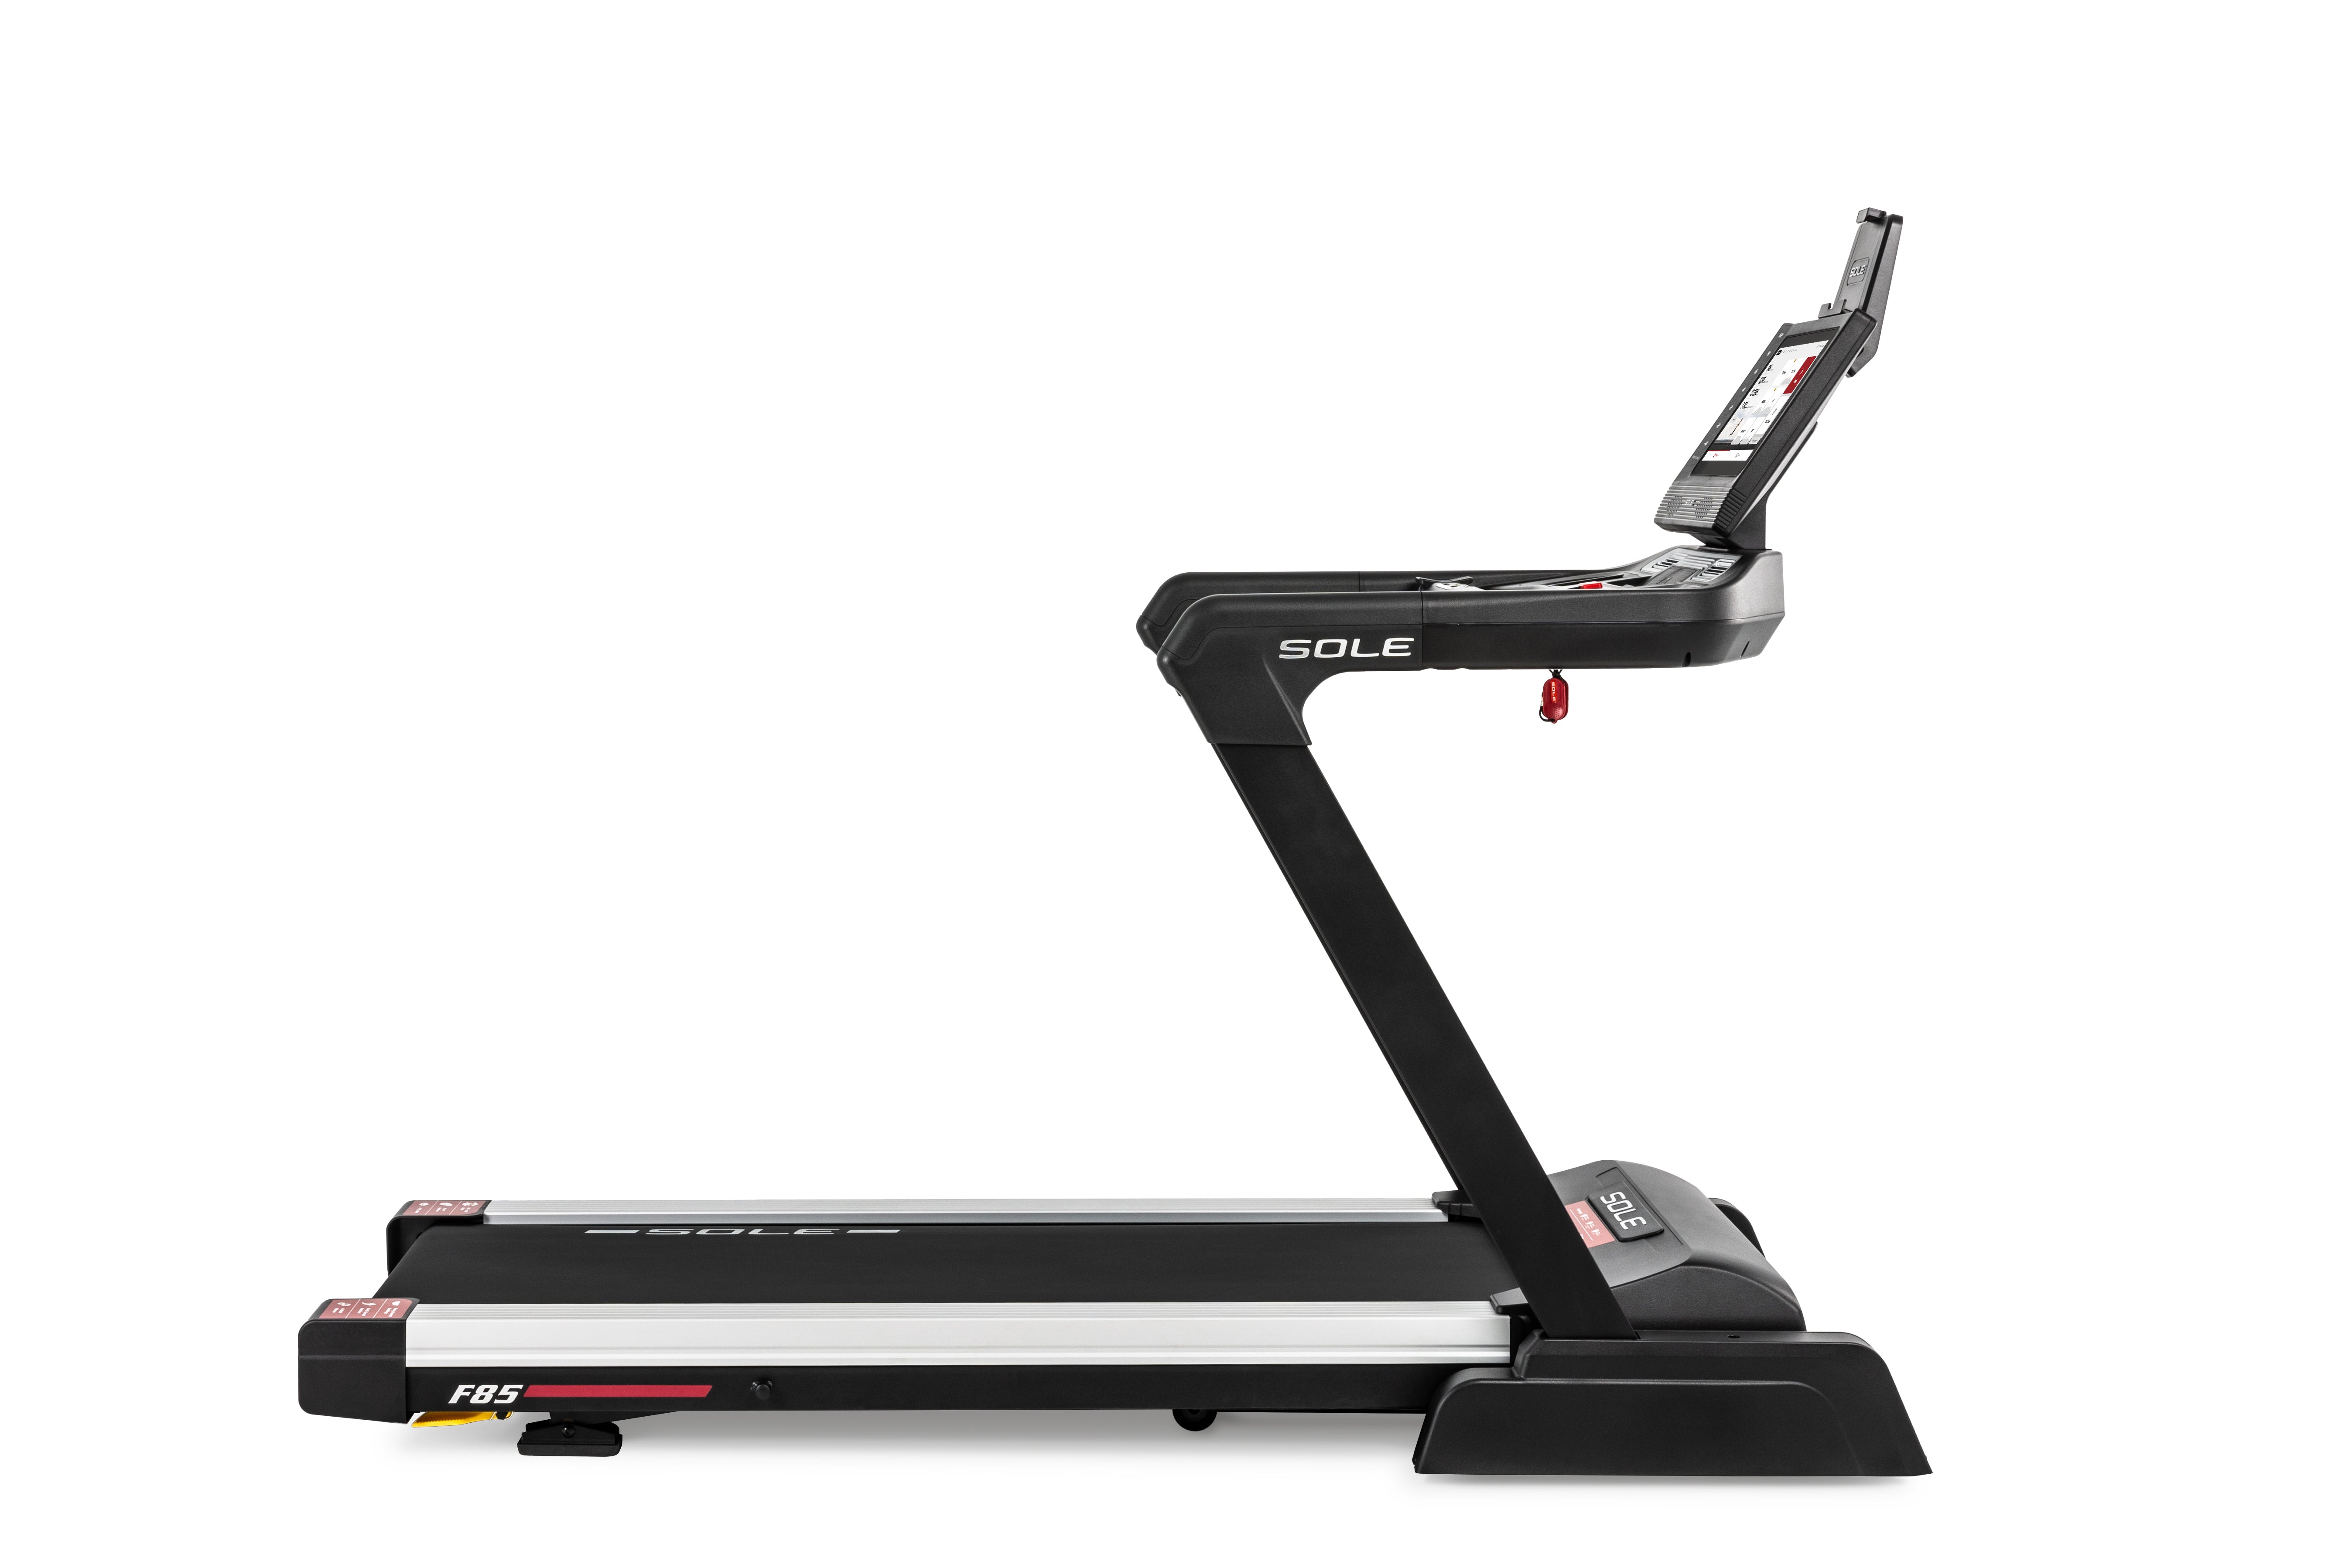 Side view of the Sole F85 treadmill displaying its sleek black frame, the "SOLE" branding on the side arm, and the "F85" logo on the gray deck with red accents. The treadmill's digital display screen is perched at the top, and the running belt surface is clearly visible.